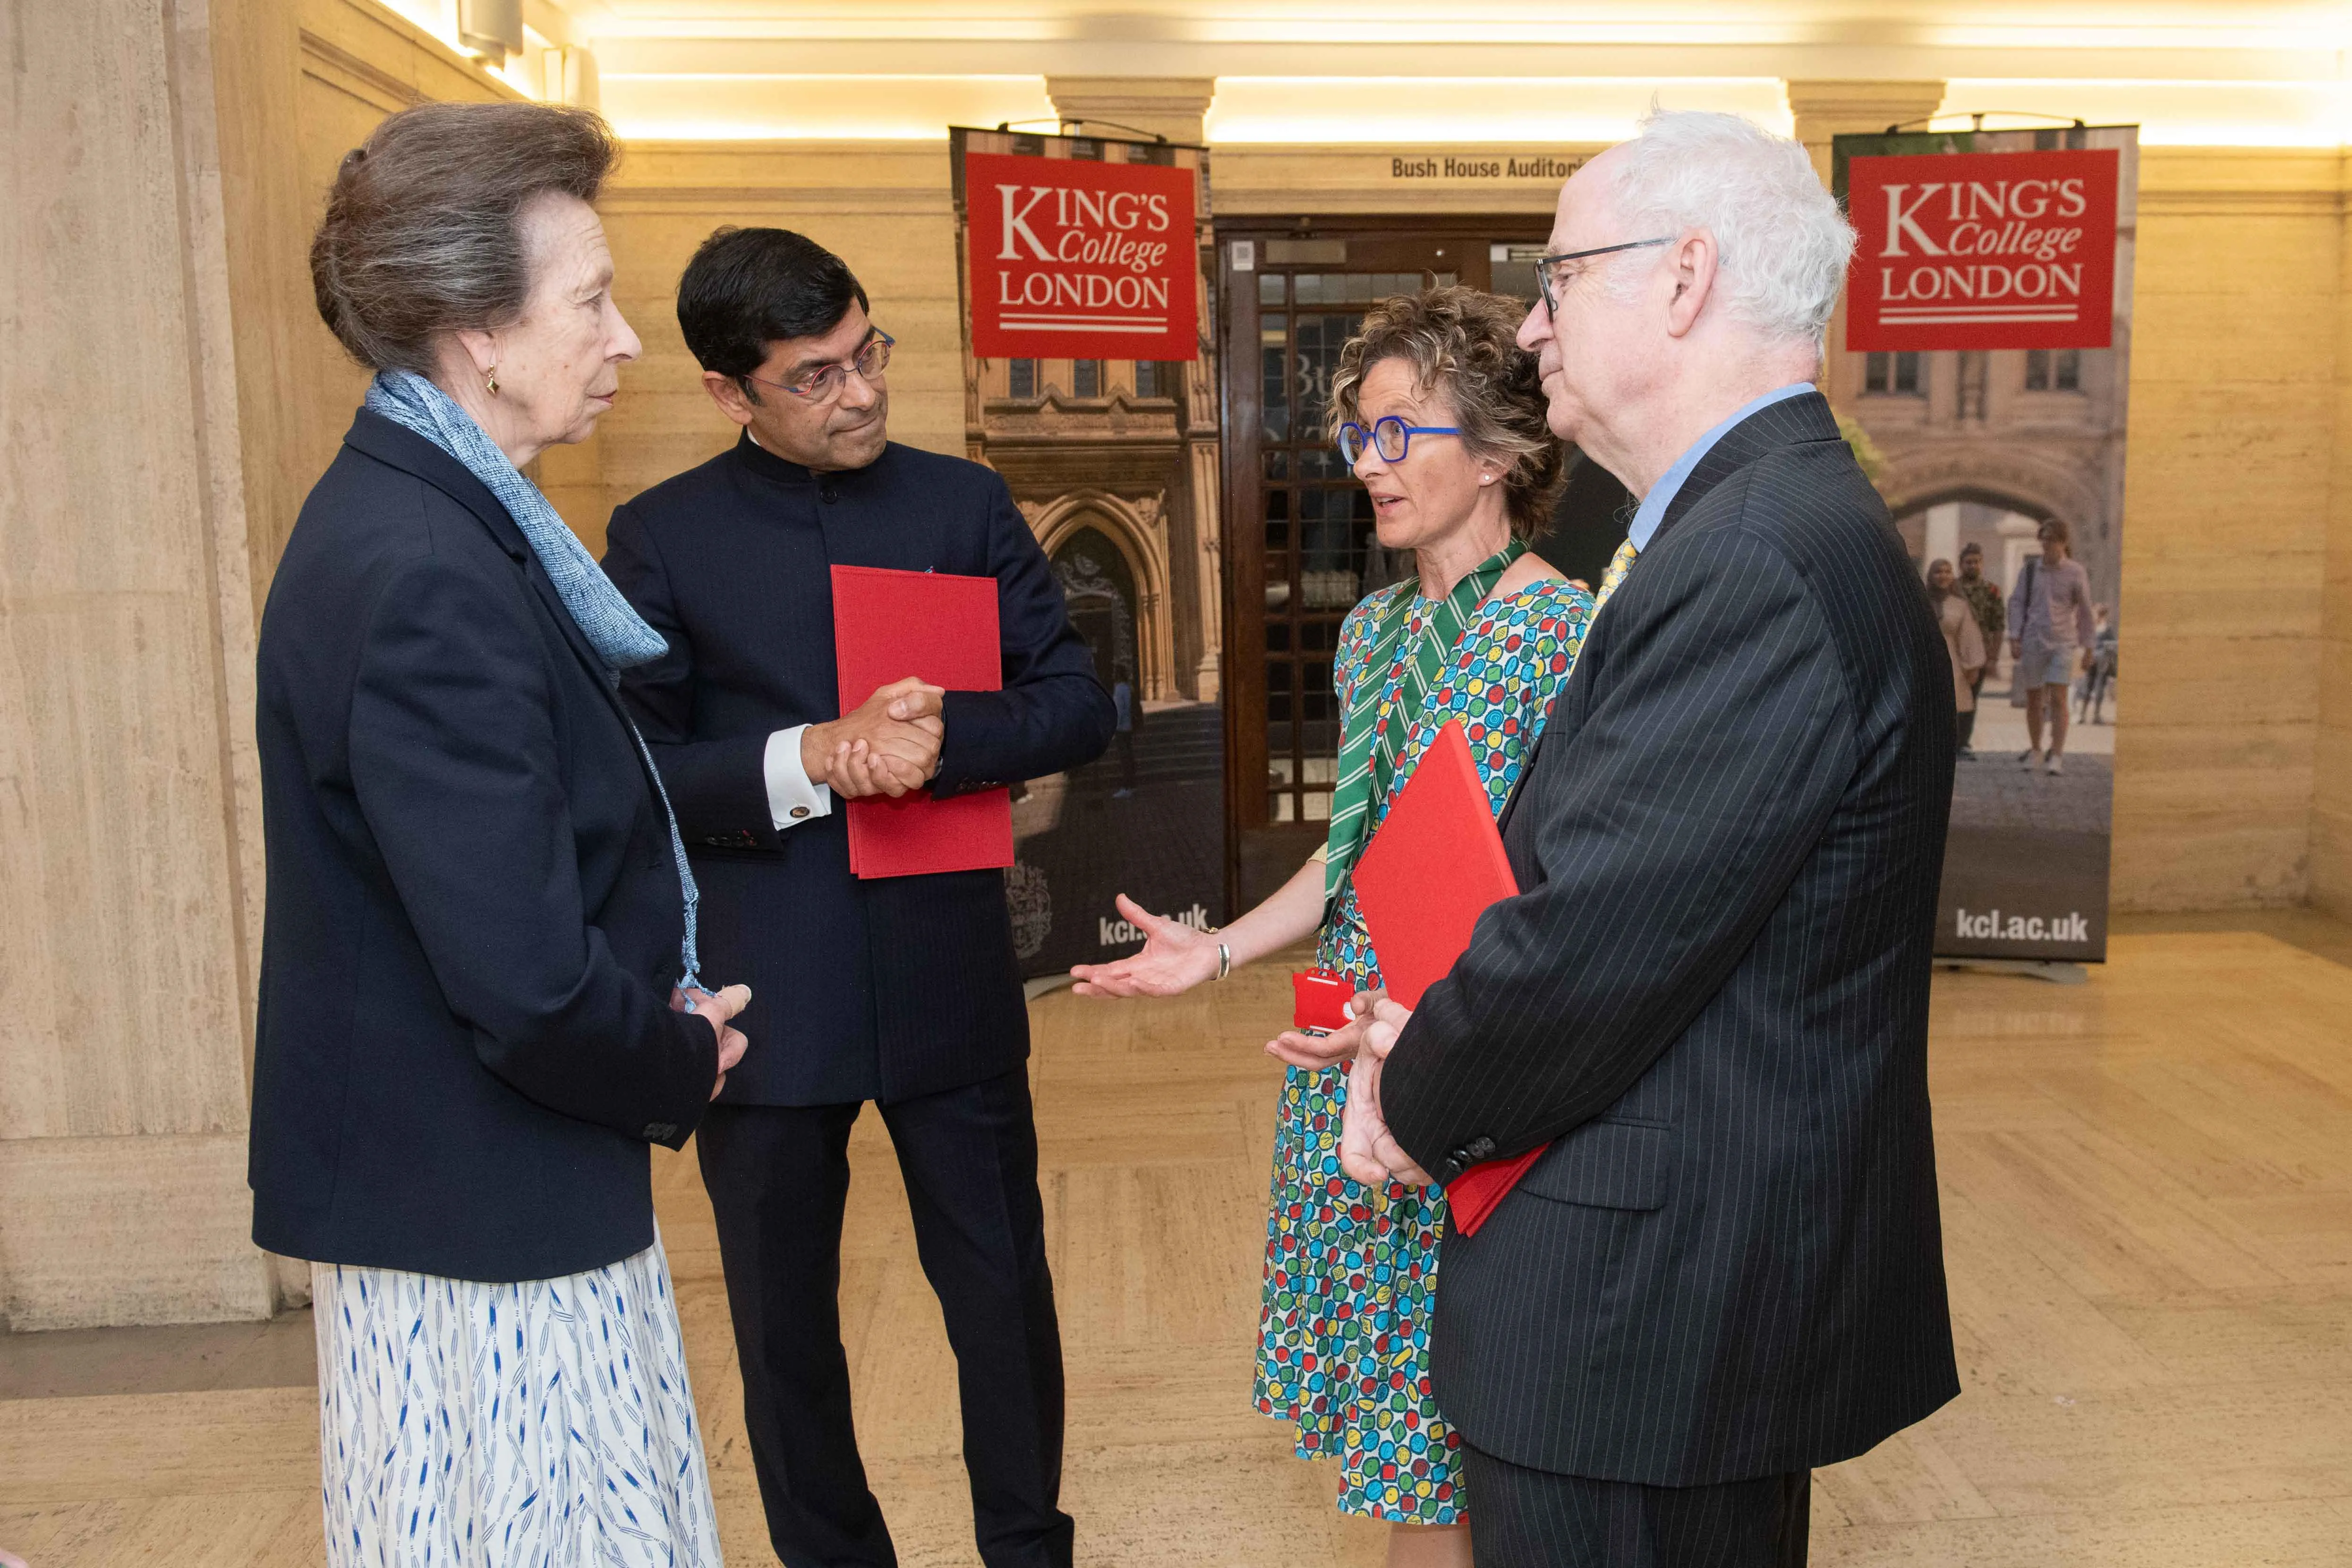 Her Royal Highness, Professor Shitij Kapur, Vice-Chancellor of King’s College London, Professor Nicola Fear, Co-director of KCMHR and Professor Sir Simon Wessely, Co-director of KCMHR. 